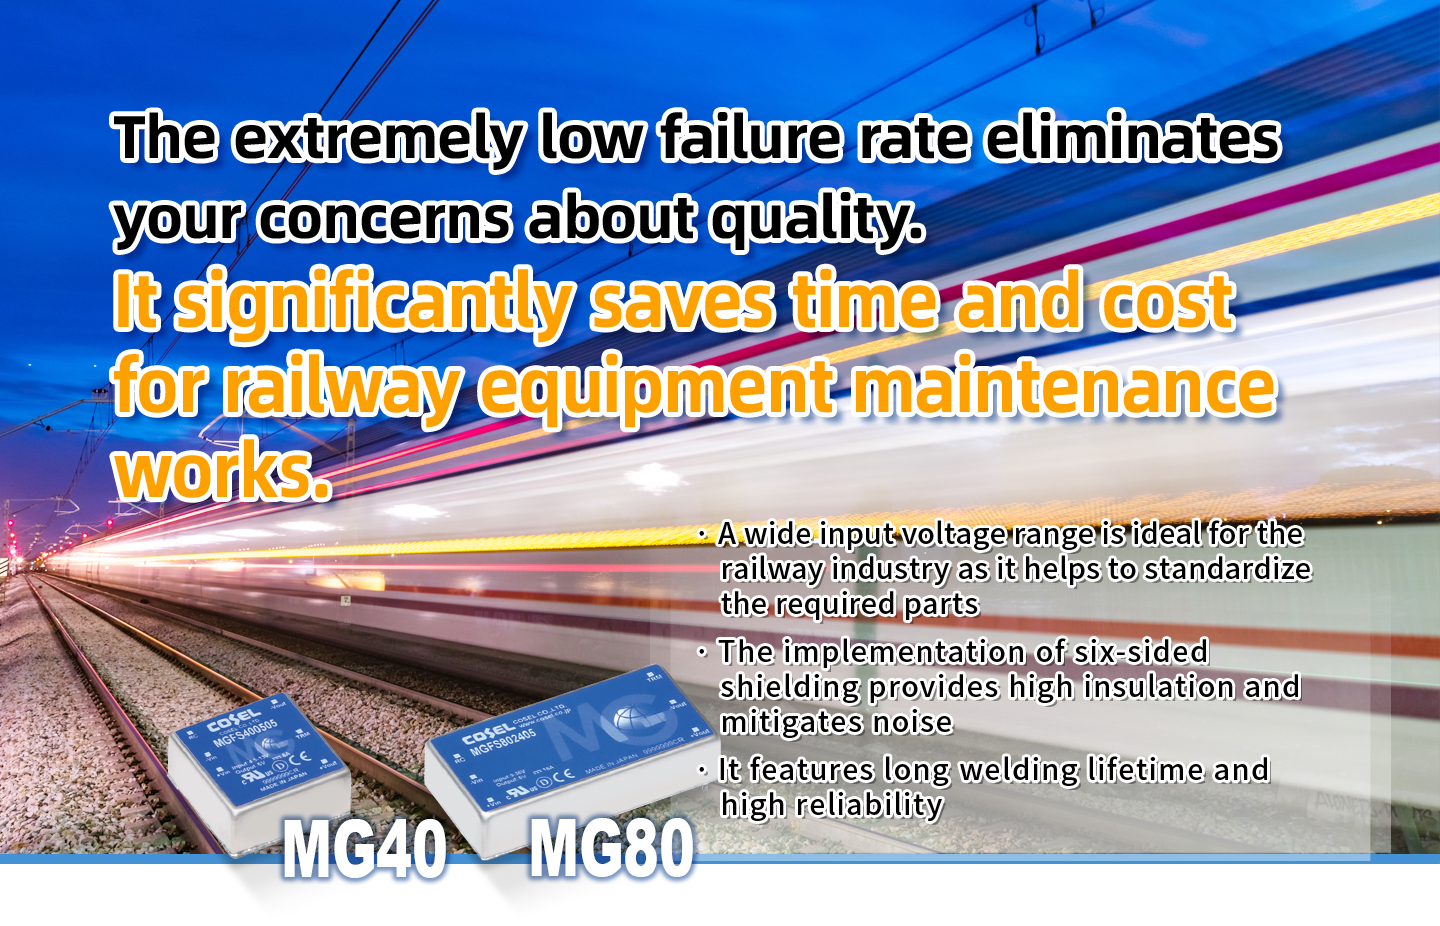 The extremely low failure rate eliminates your concerns about quality.It significantly saves time and cost for railway equipment maintenance works.· A wide input voltage range is ideal for the railway industry as it helps to standardize the required parts· The implementation of six-sided shielding provides high insulation and mitigates noise· It features long welding lifetime and high reliability